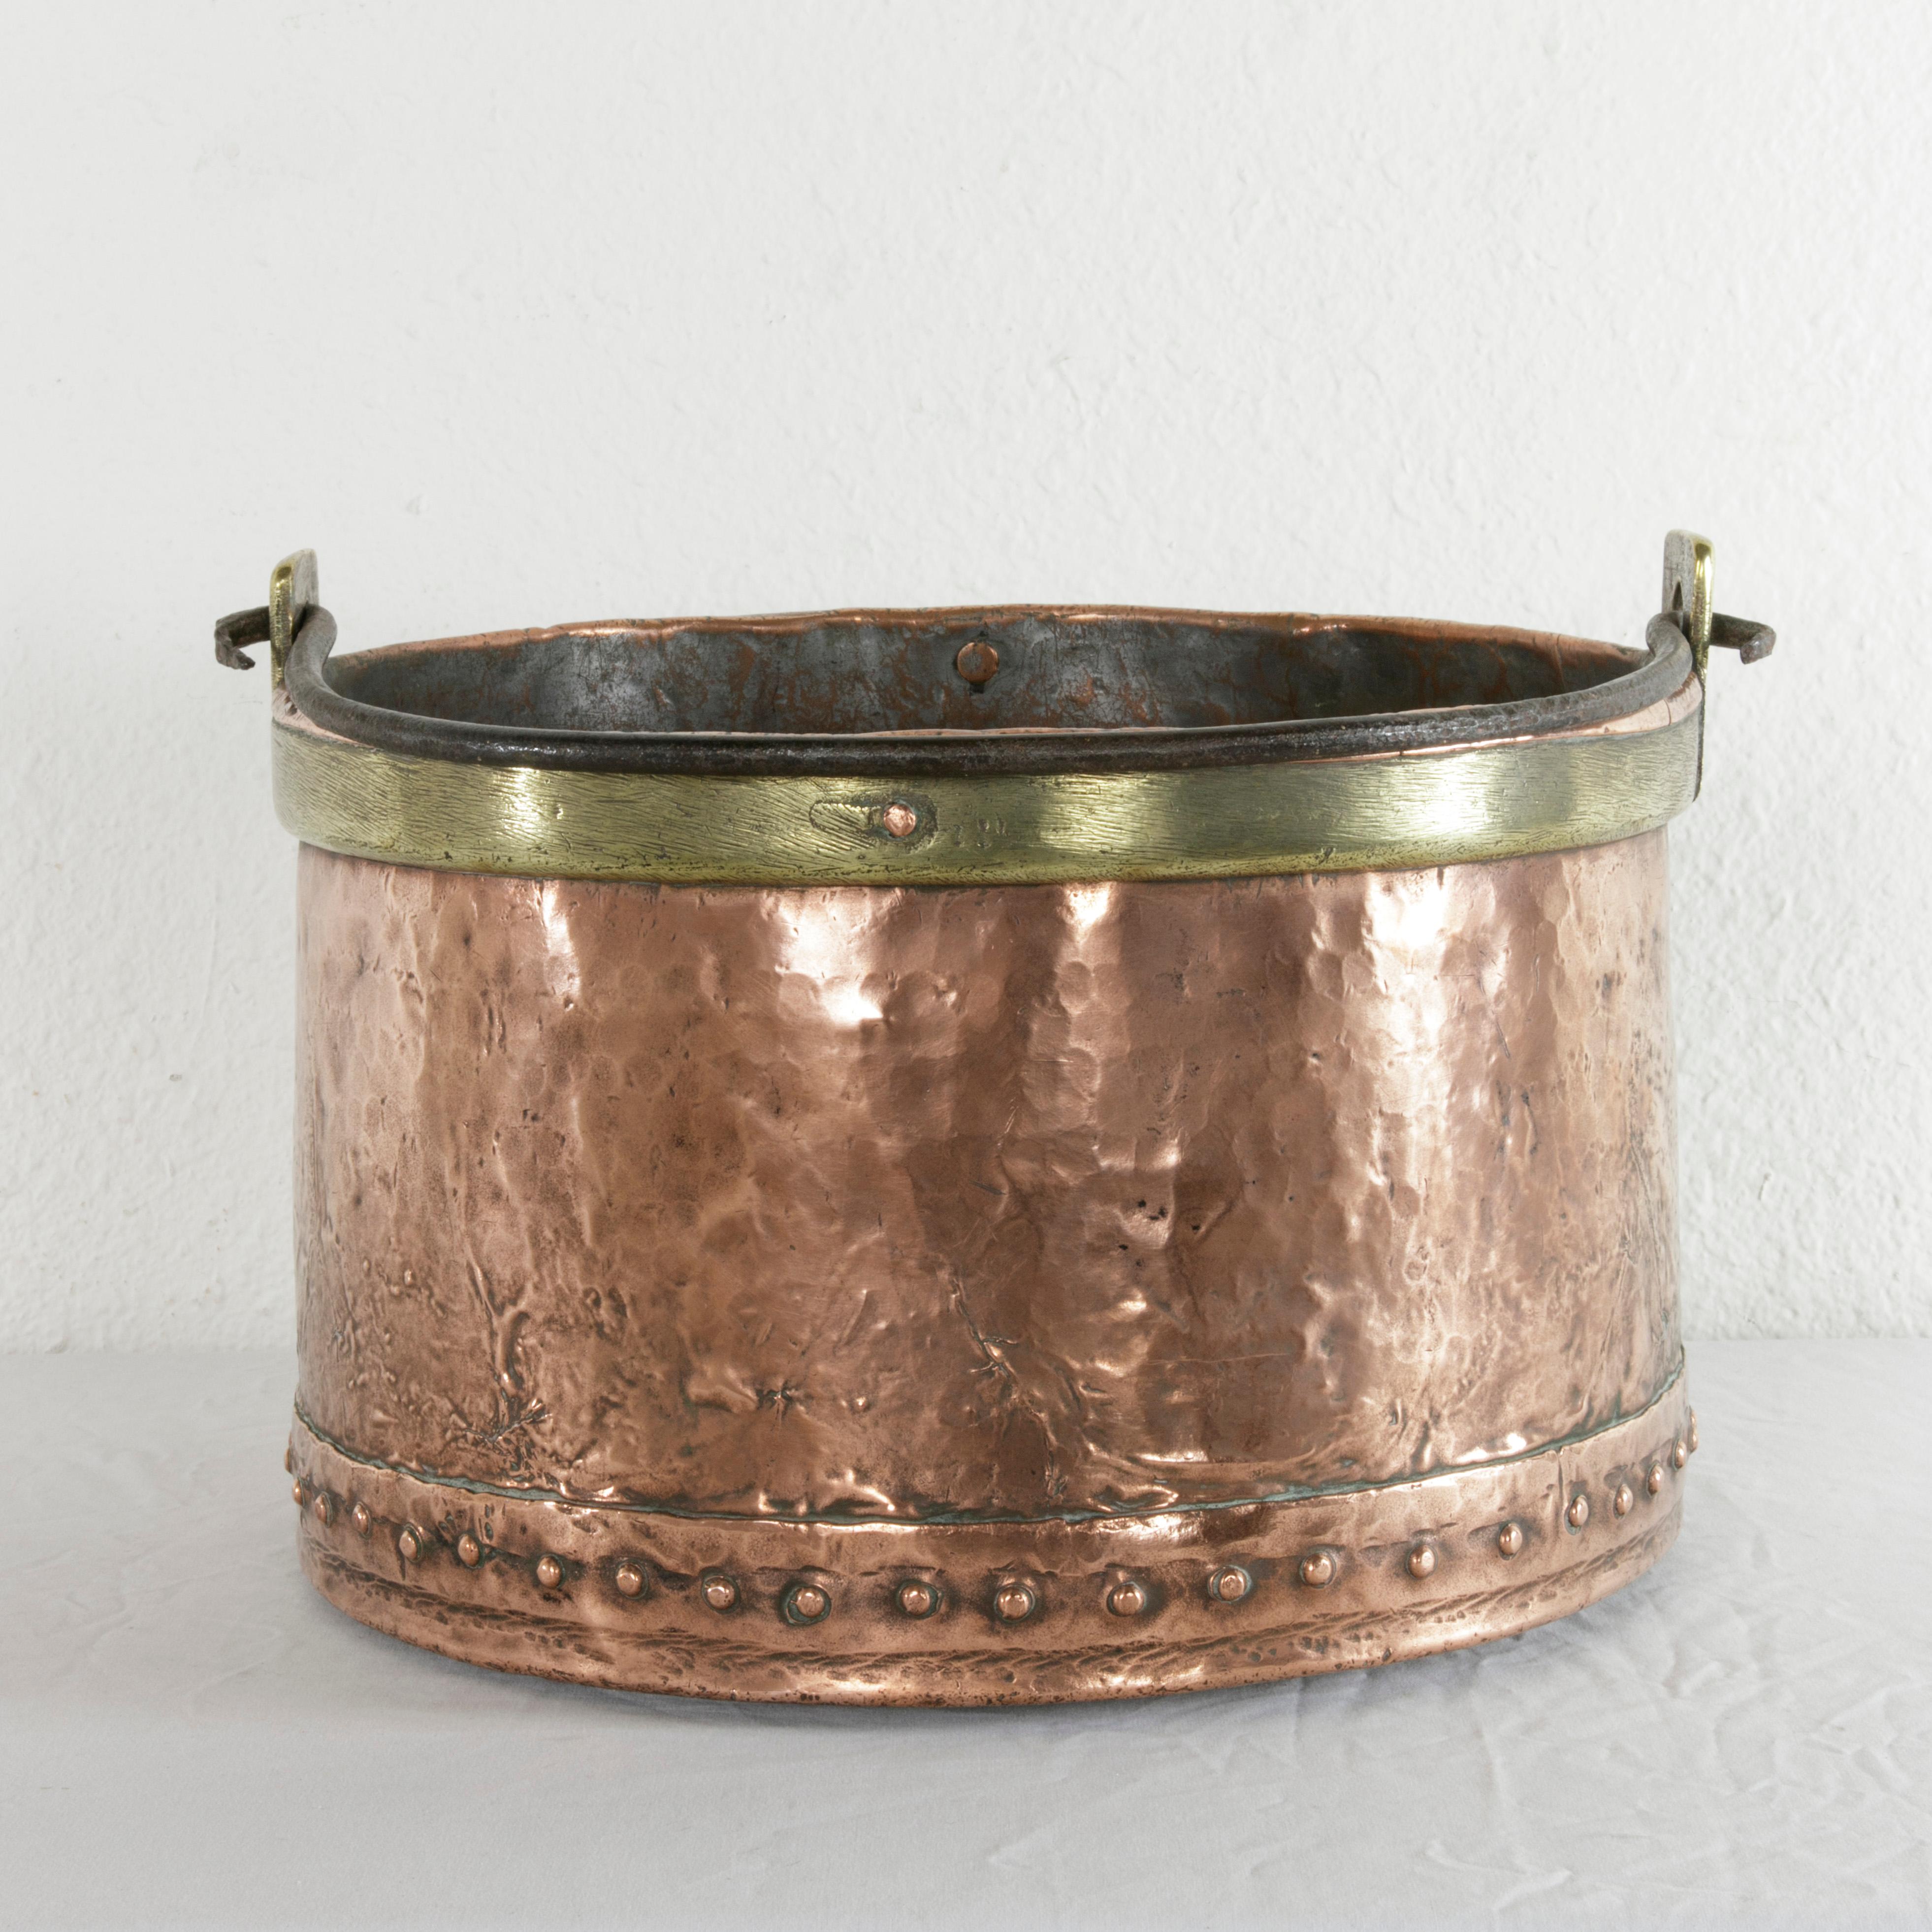 Forged Large 19th Century French Riveted Copper Cauldron with Brass Banding and Handle